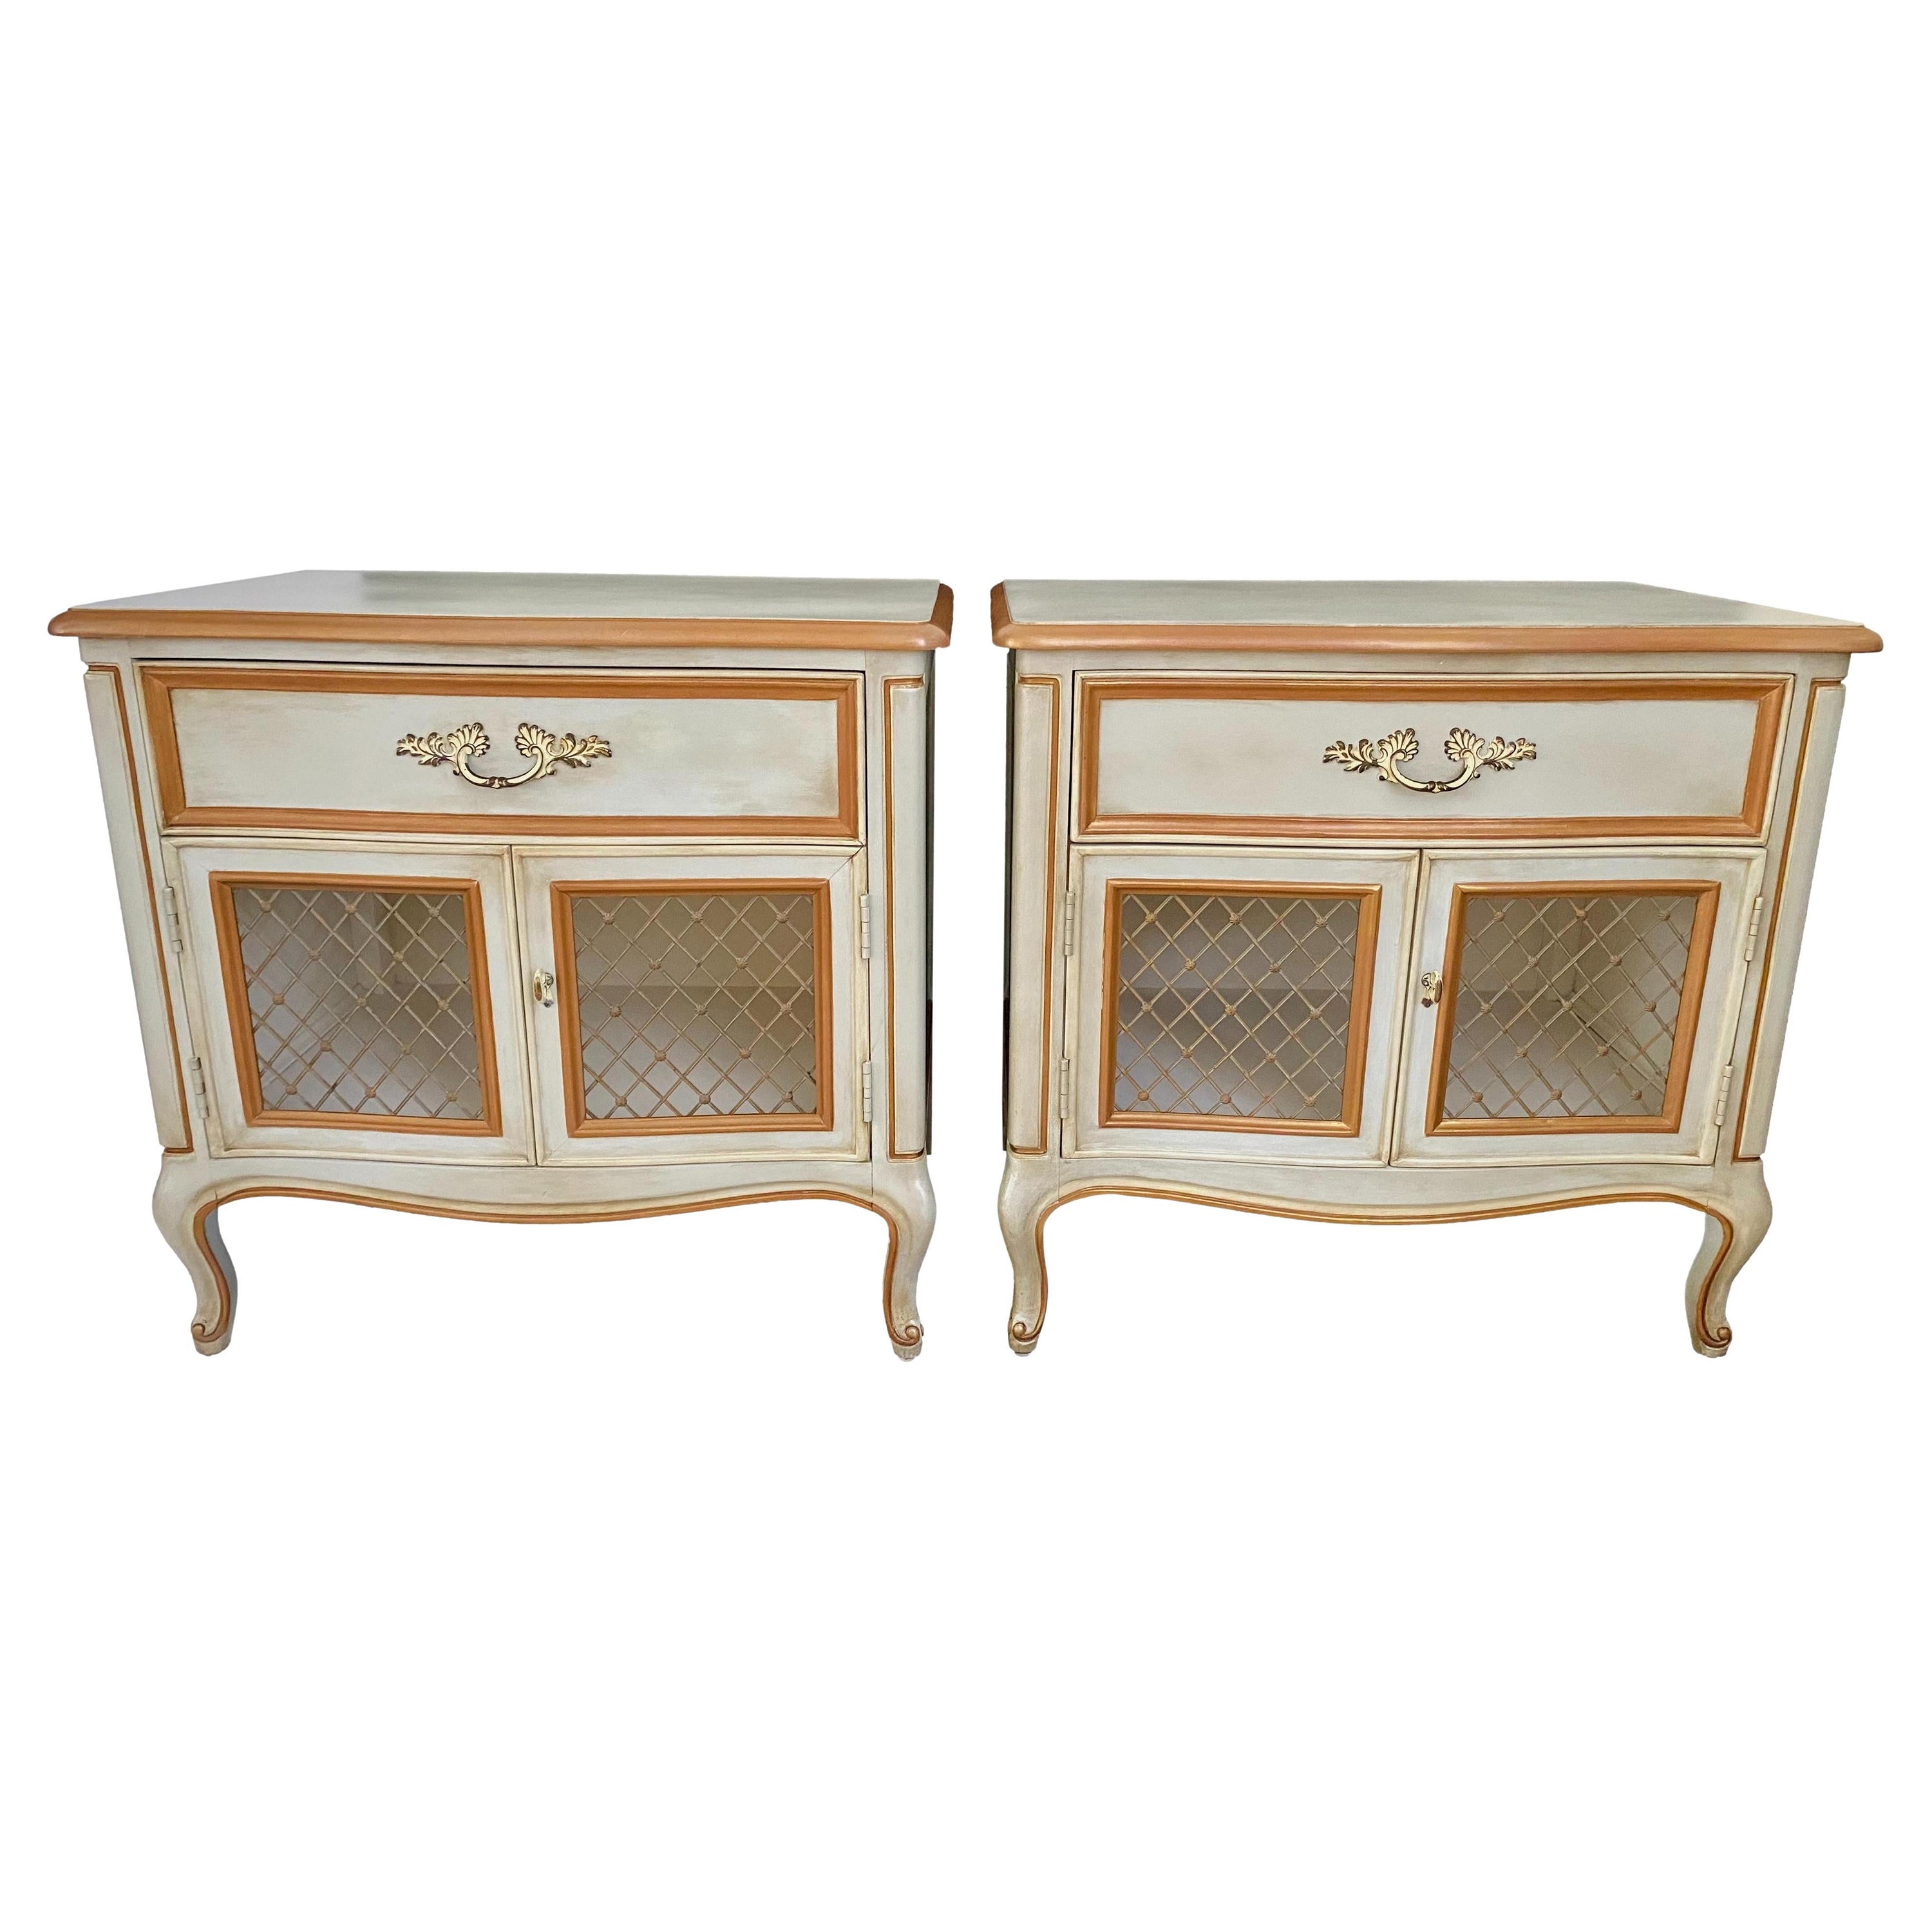 Vintage Henredon Louis XV Provincial Nightstands, a Refinished Pair